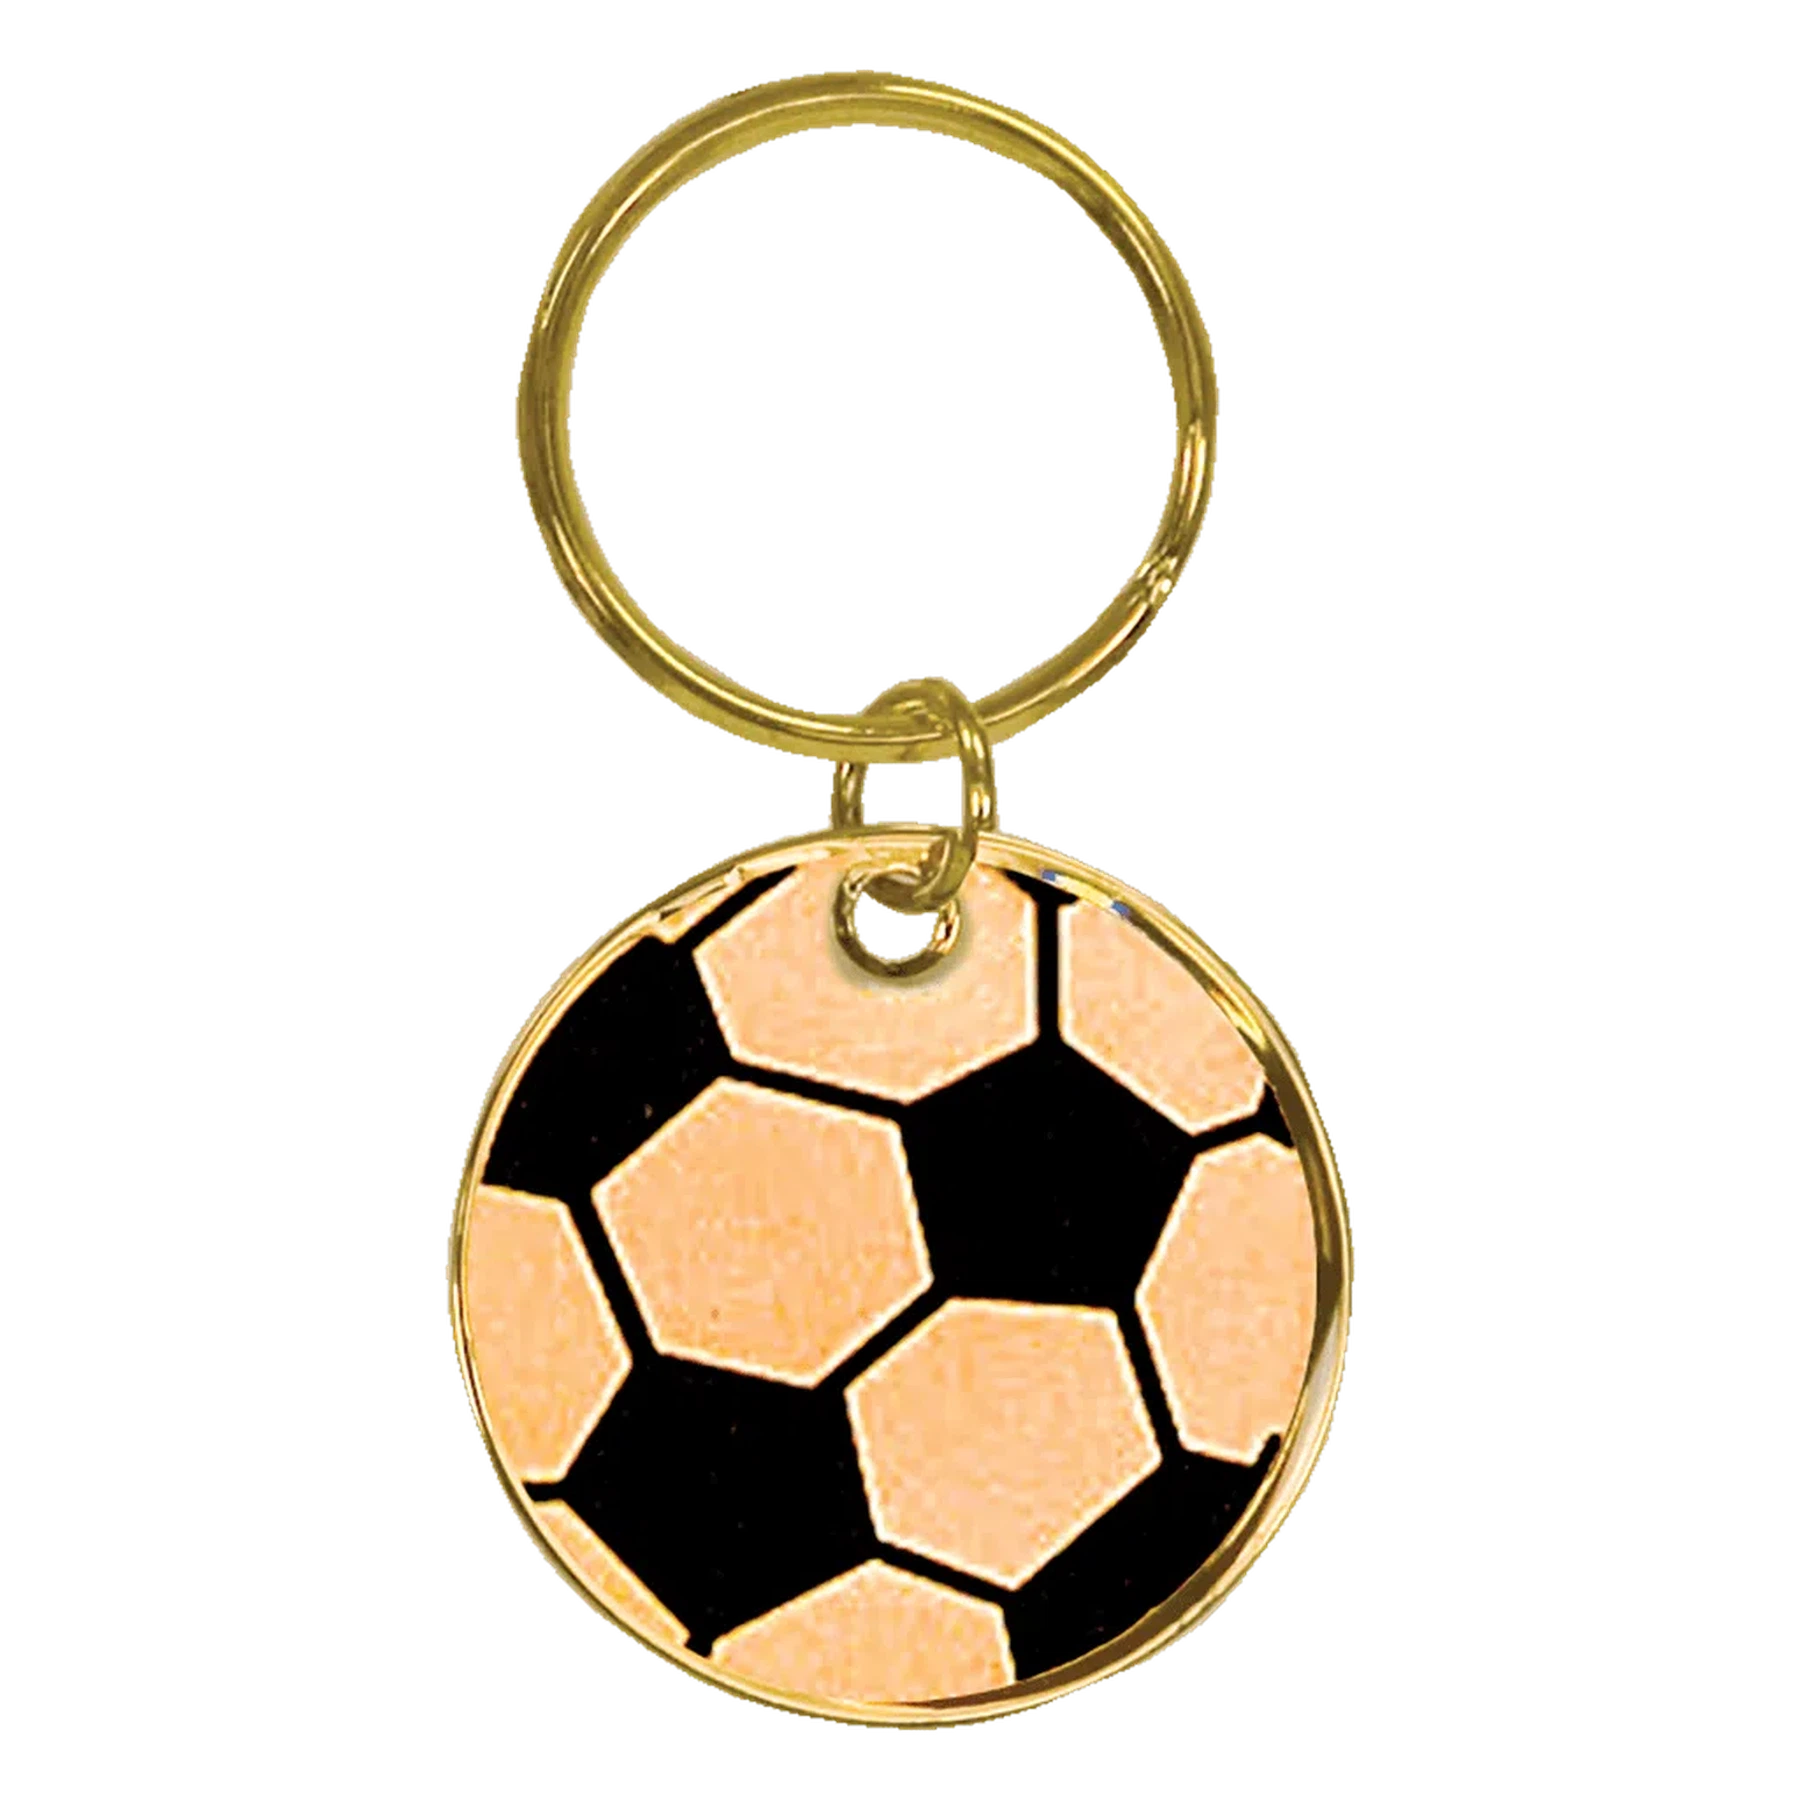 Personalized Commemorative Gold Brass Keychains